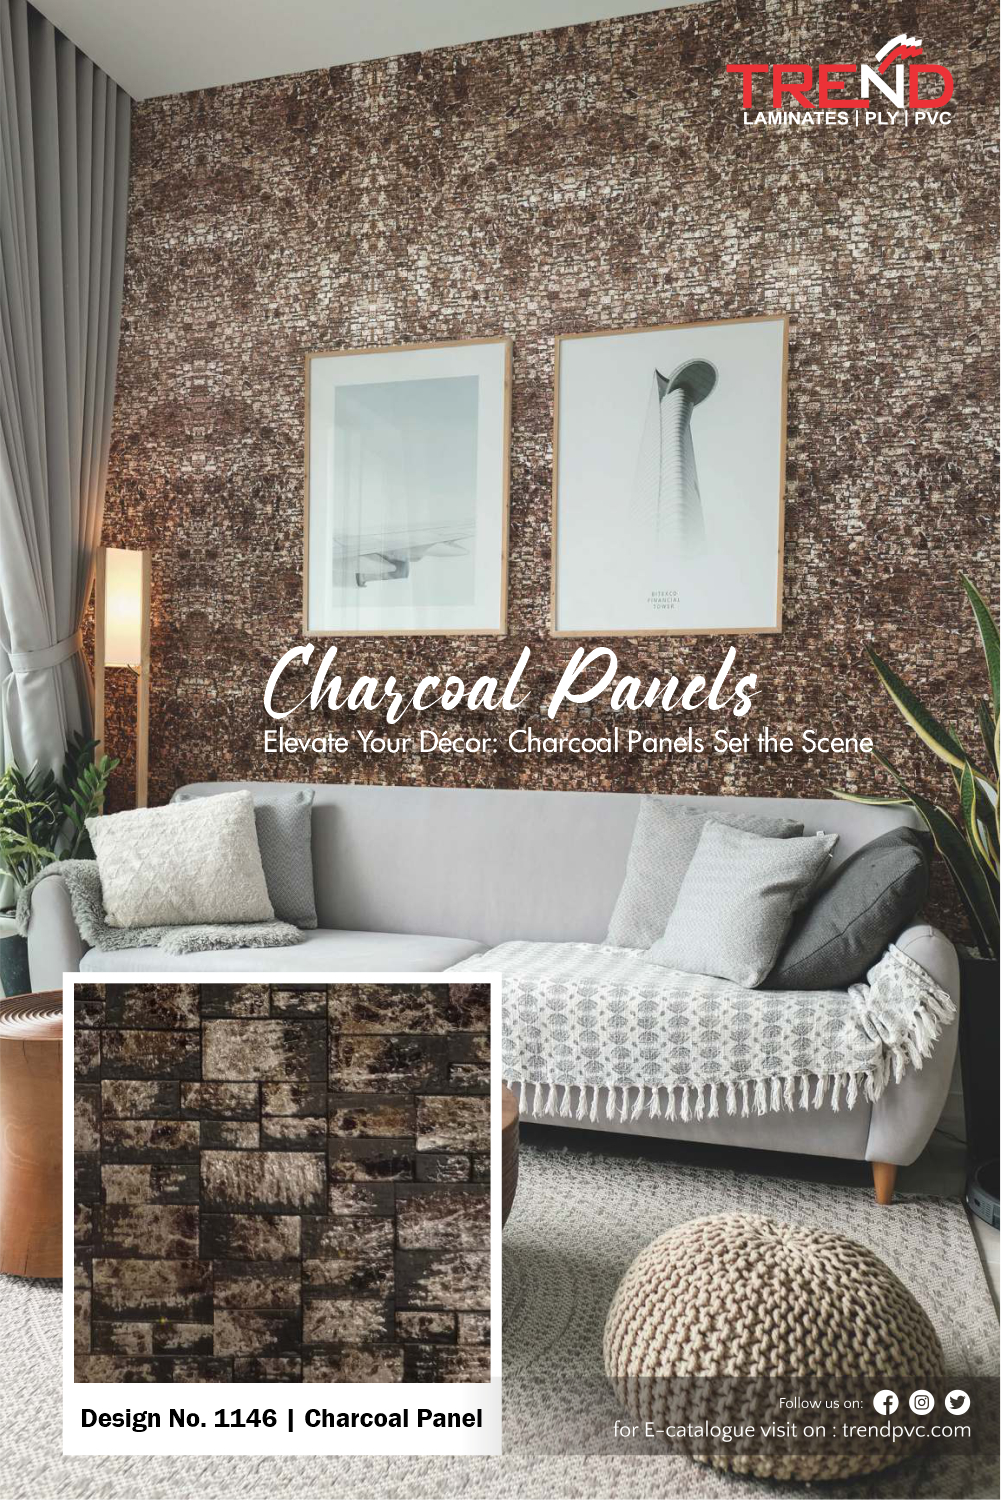 Enhance Your Interior Design with Charcoal Panel by Trend Laminate